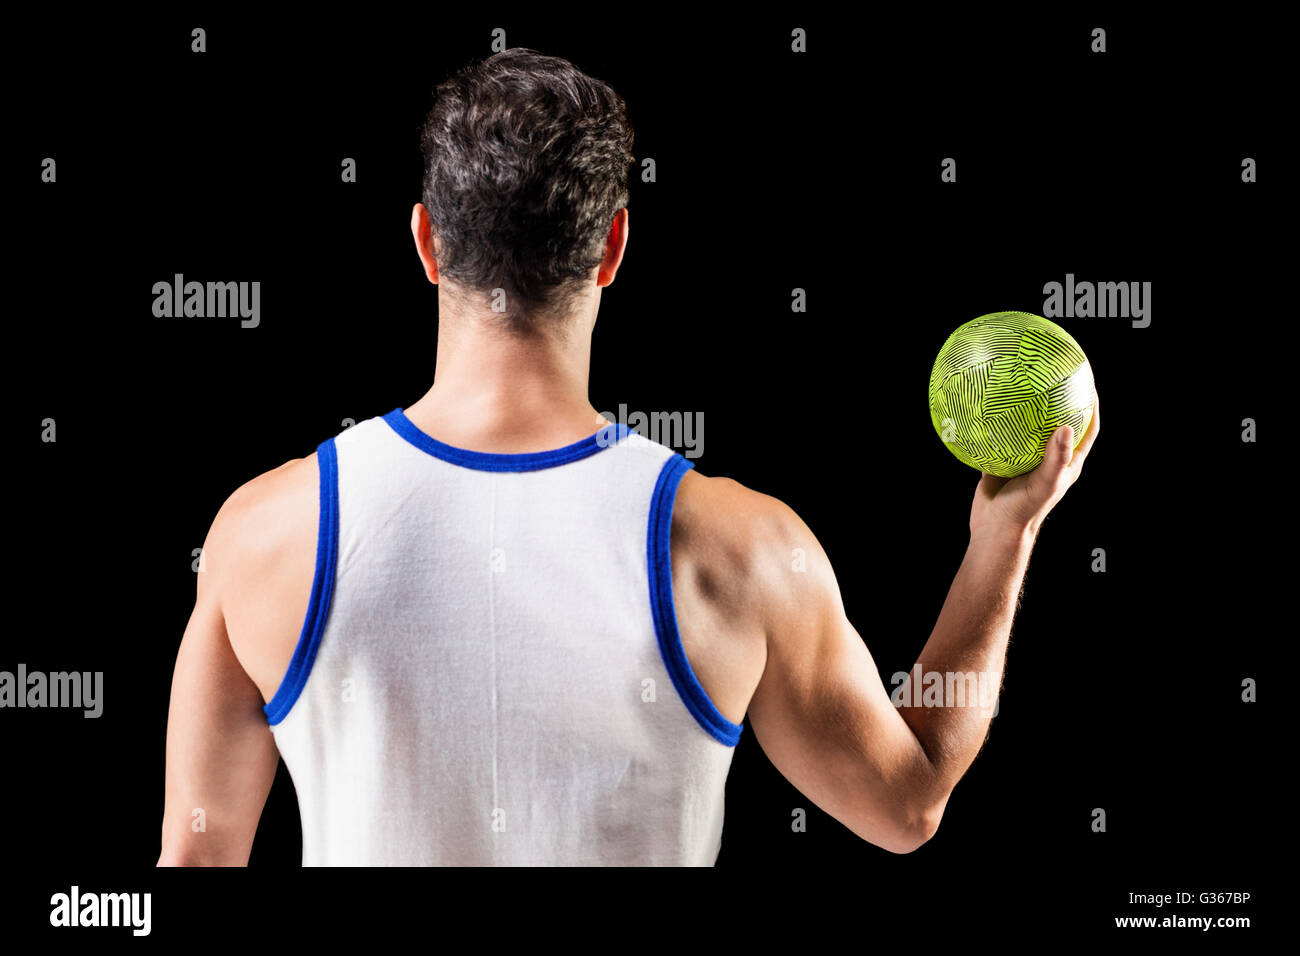 Rear view of male athlete holding ball Stock Photo